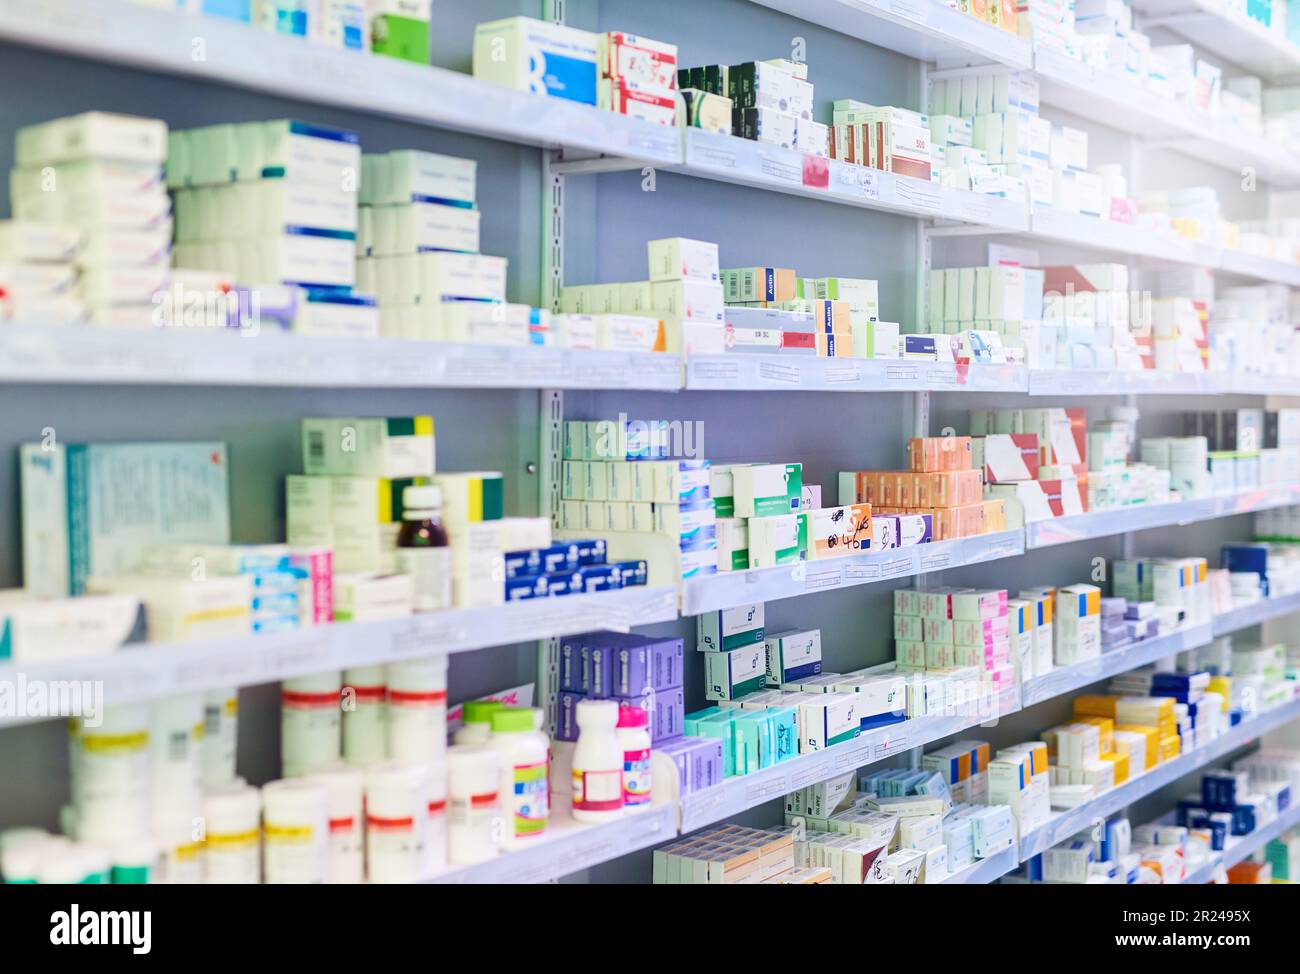 https://c8.alamy.com/comp/2R2495X/pharmacy-shelf-and-boxes-for-product-empty-or-pharmaceutical-stock-for-wellness-health-and-interior-shop-store-and-retail-healthcare-with-storage-2R2495X.jpg